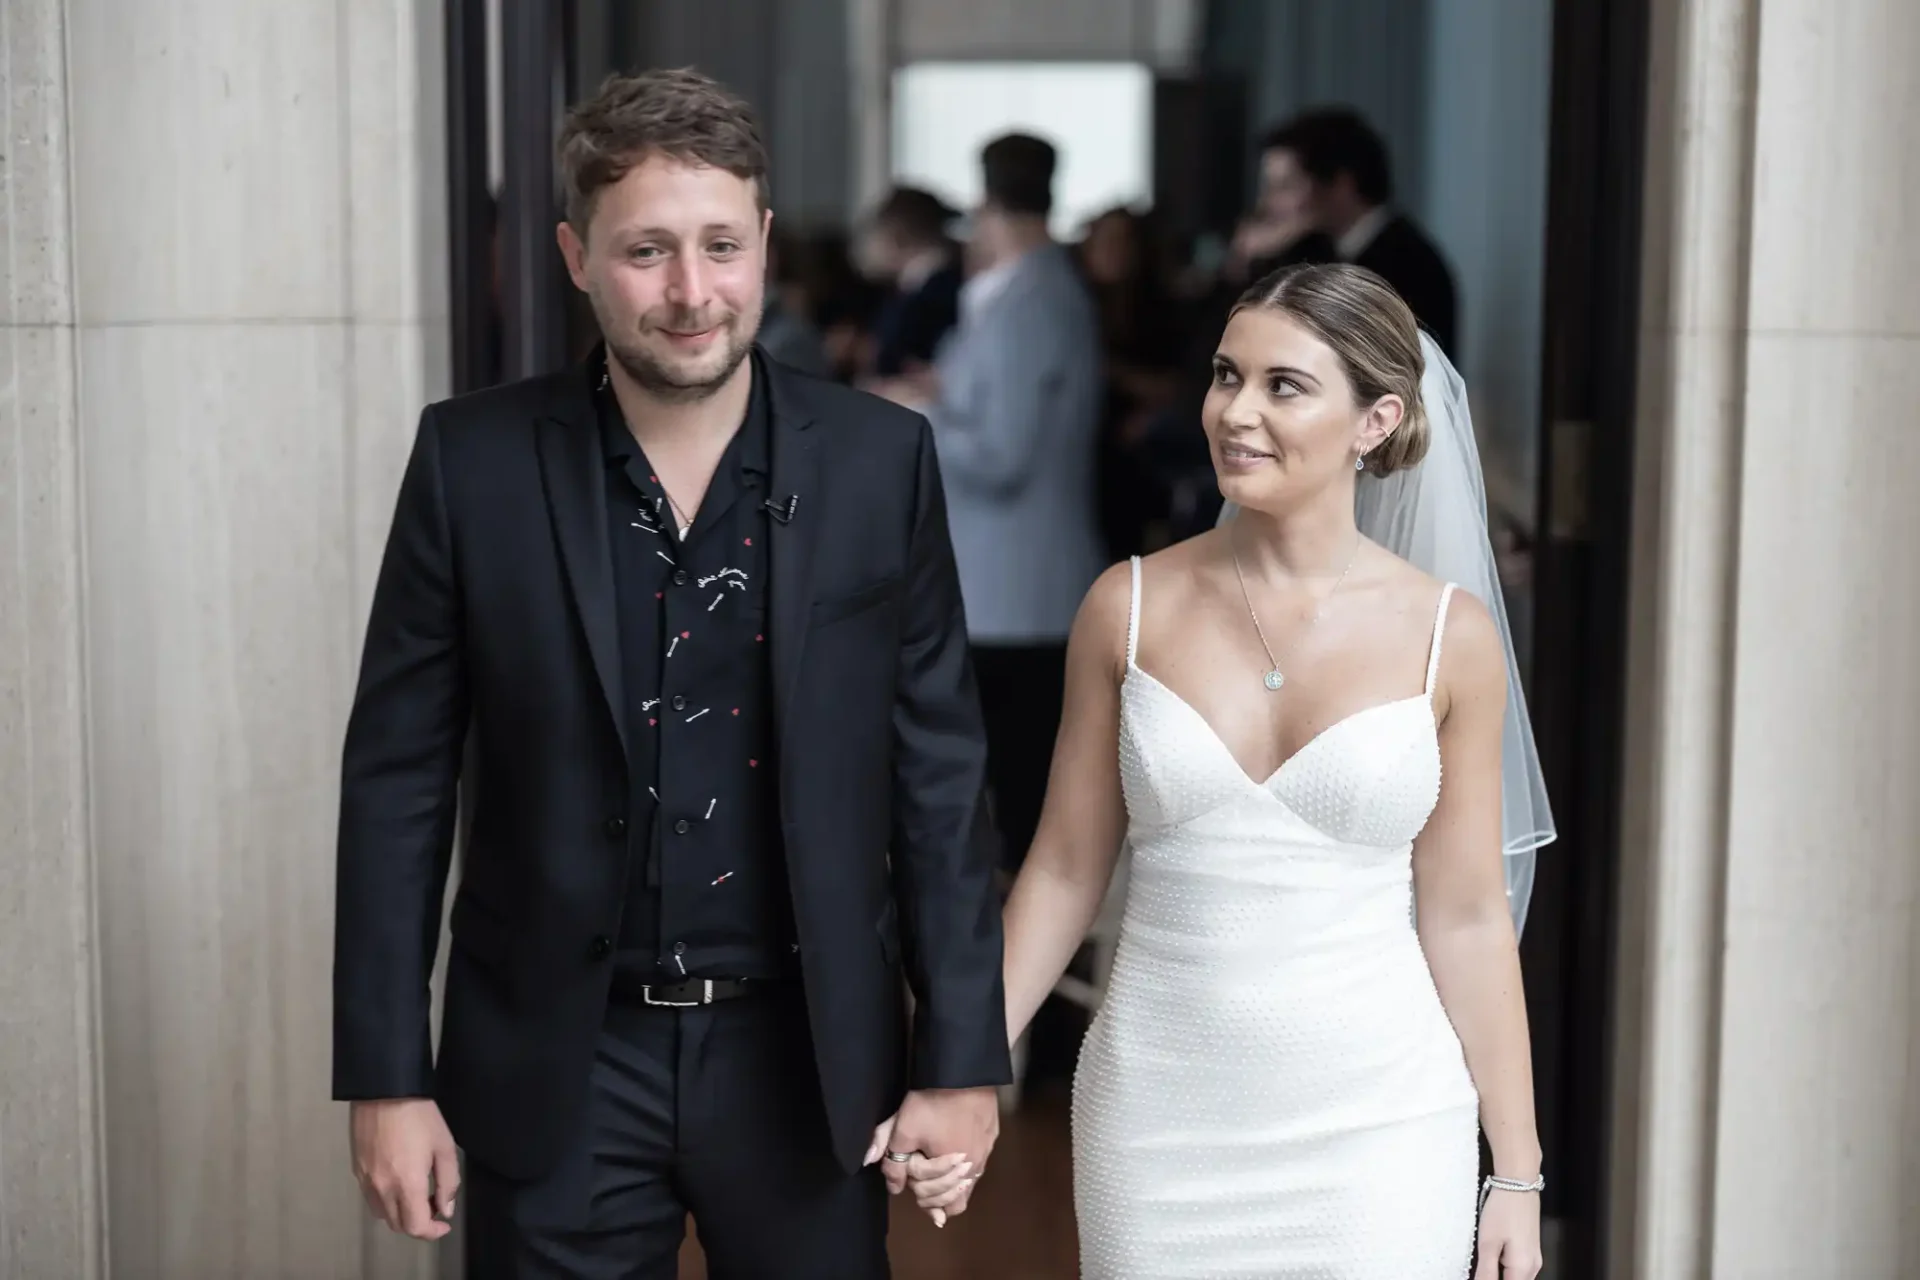 A bride in a white gown and a groom in a black suit walk hand in hand with smiles, indoors at a wedding venue.